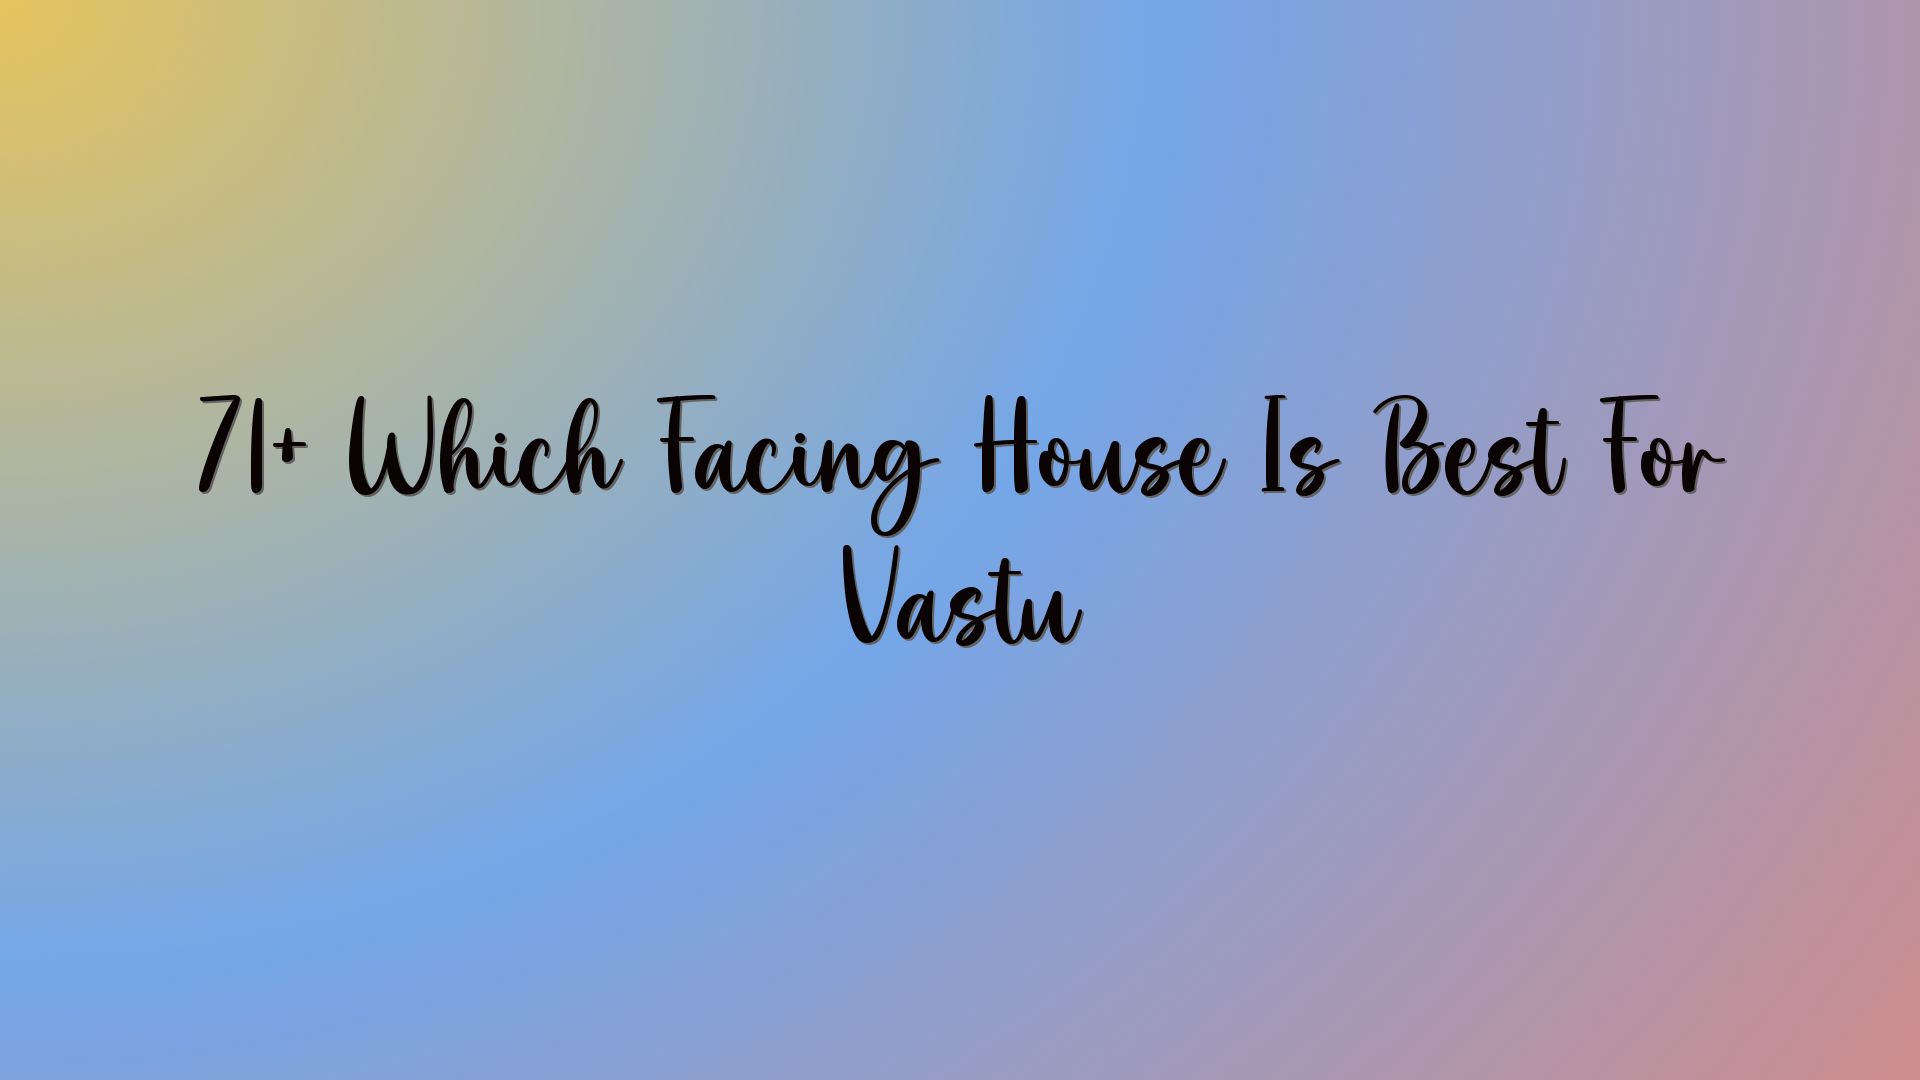 71+ Which Facing House Is Best For Vastu